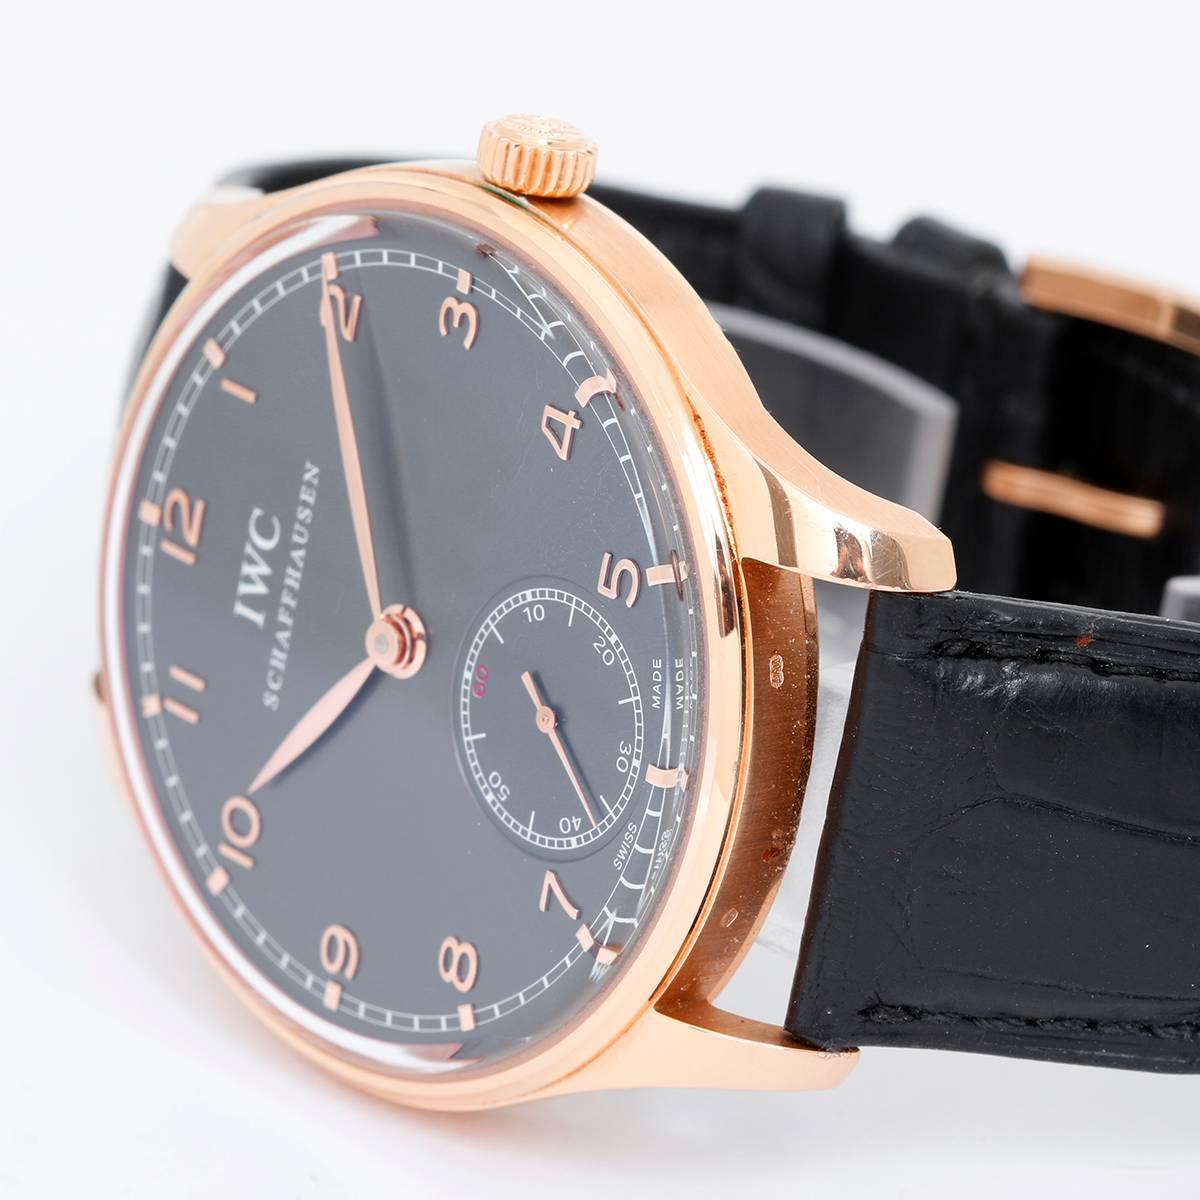 IWC Portuguese Rose Gold Hand Wound Men's Watch -  Manual Winding. 18K Rose Gold  ( 44 mm ). Black dial with Arabic numerals; sub dial at 6 o'clock. Black IWC leather strap.  Pre-owned with box and papers.